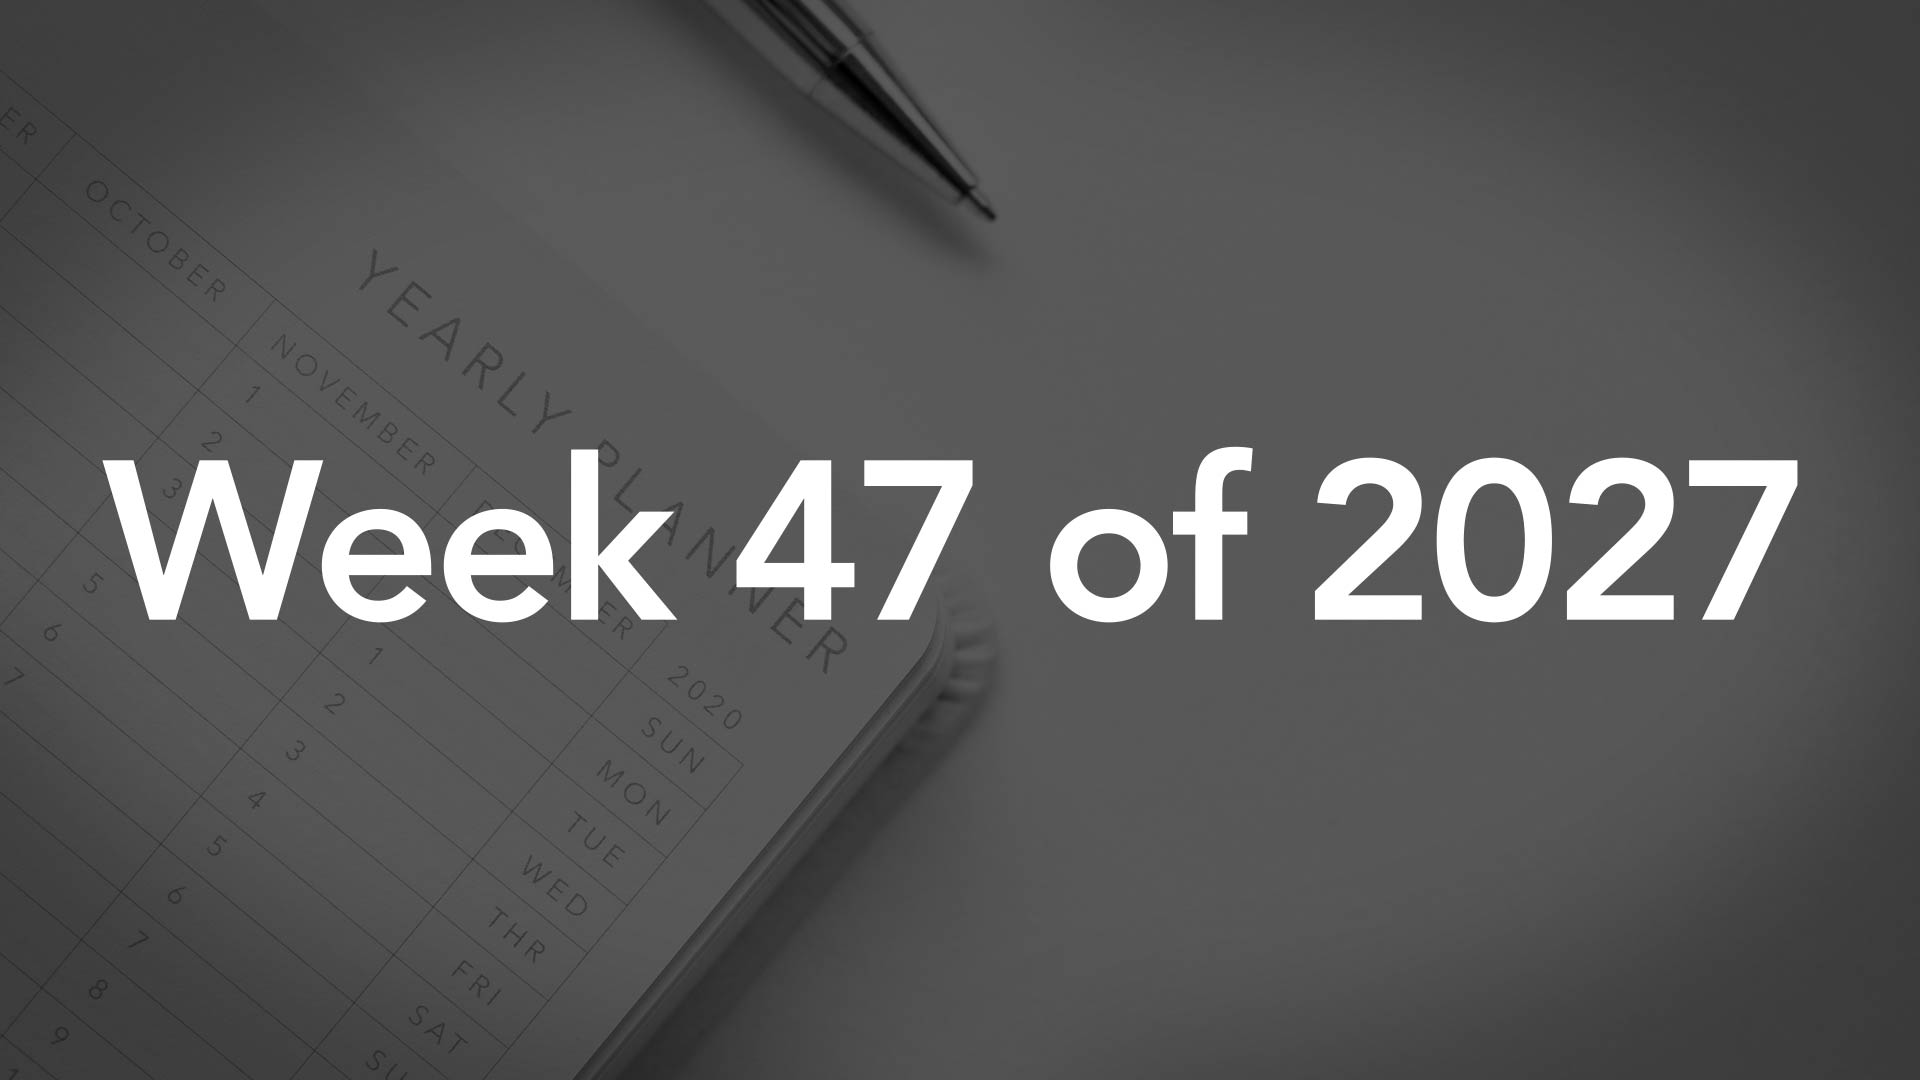 Title Image for Week 47 of 2027